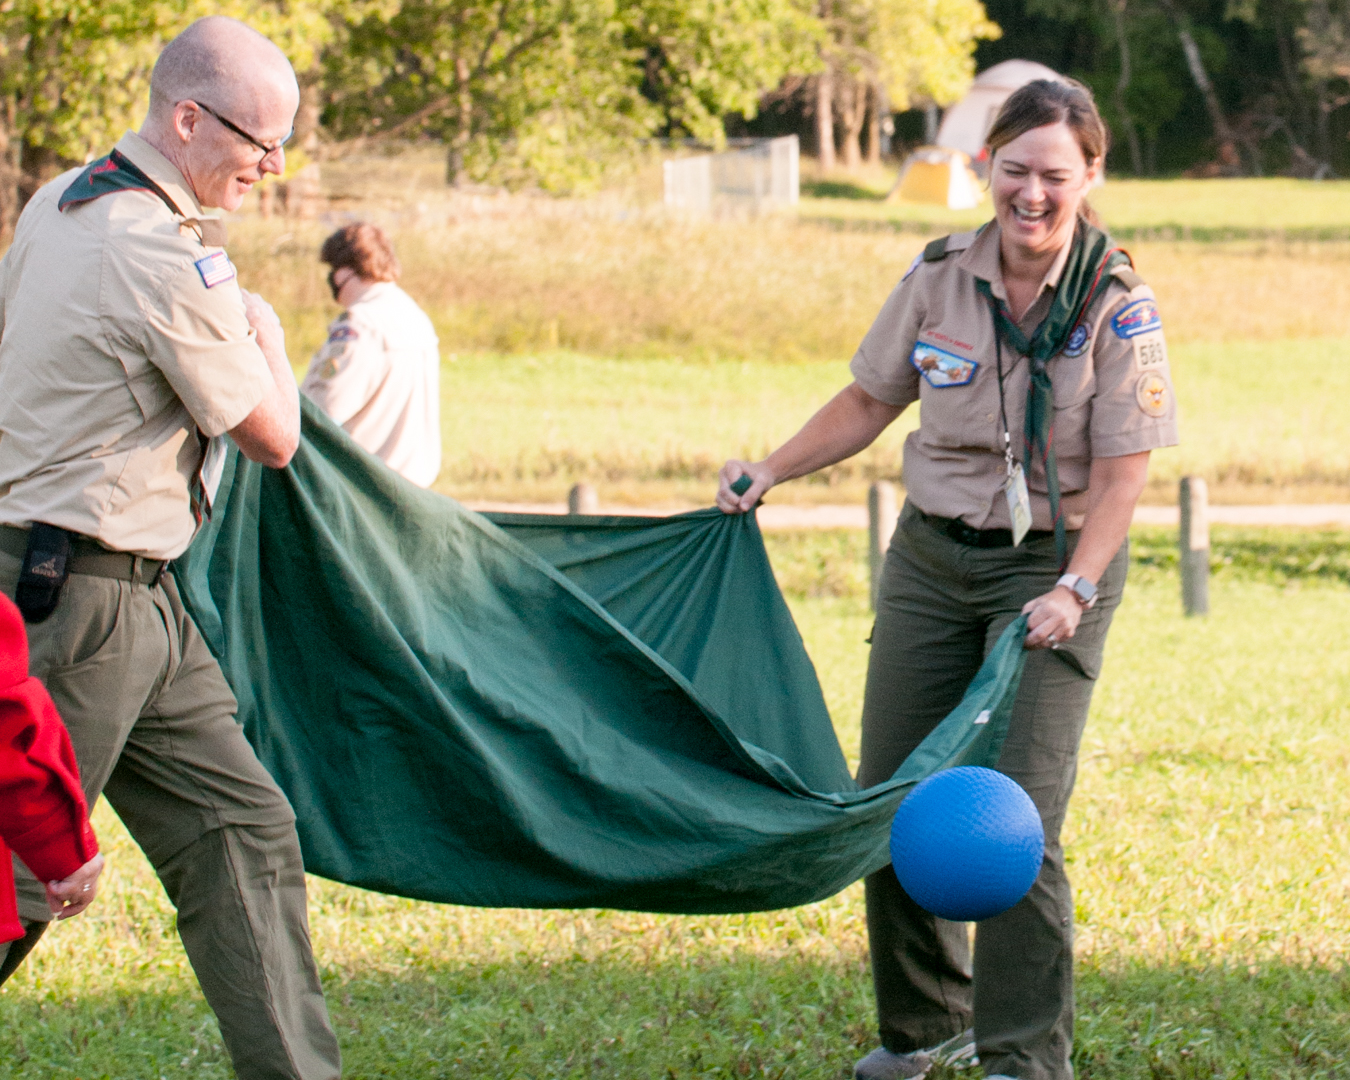 Two older adult participants wearing the Scout uniform are playing a team-building game and laughing.